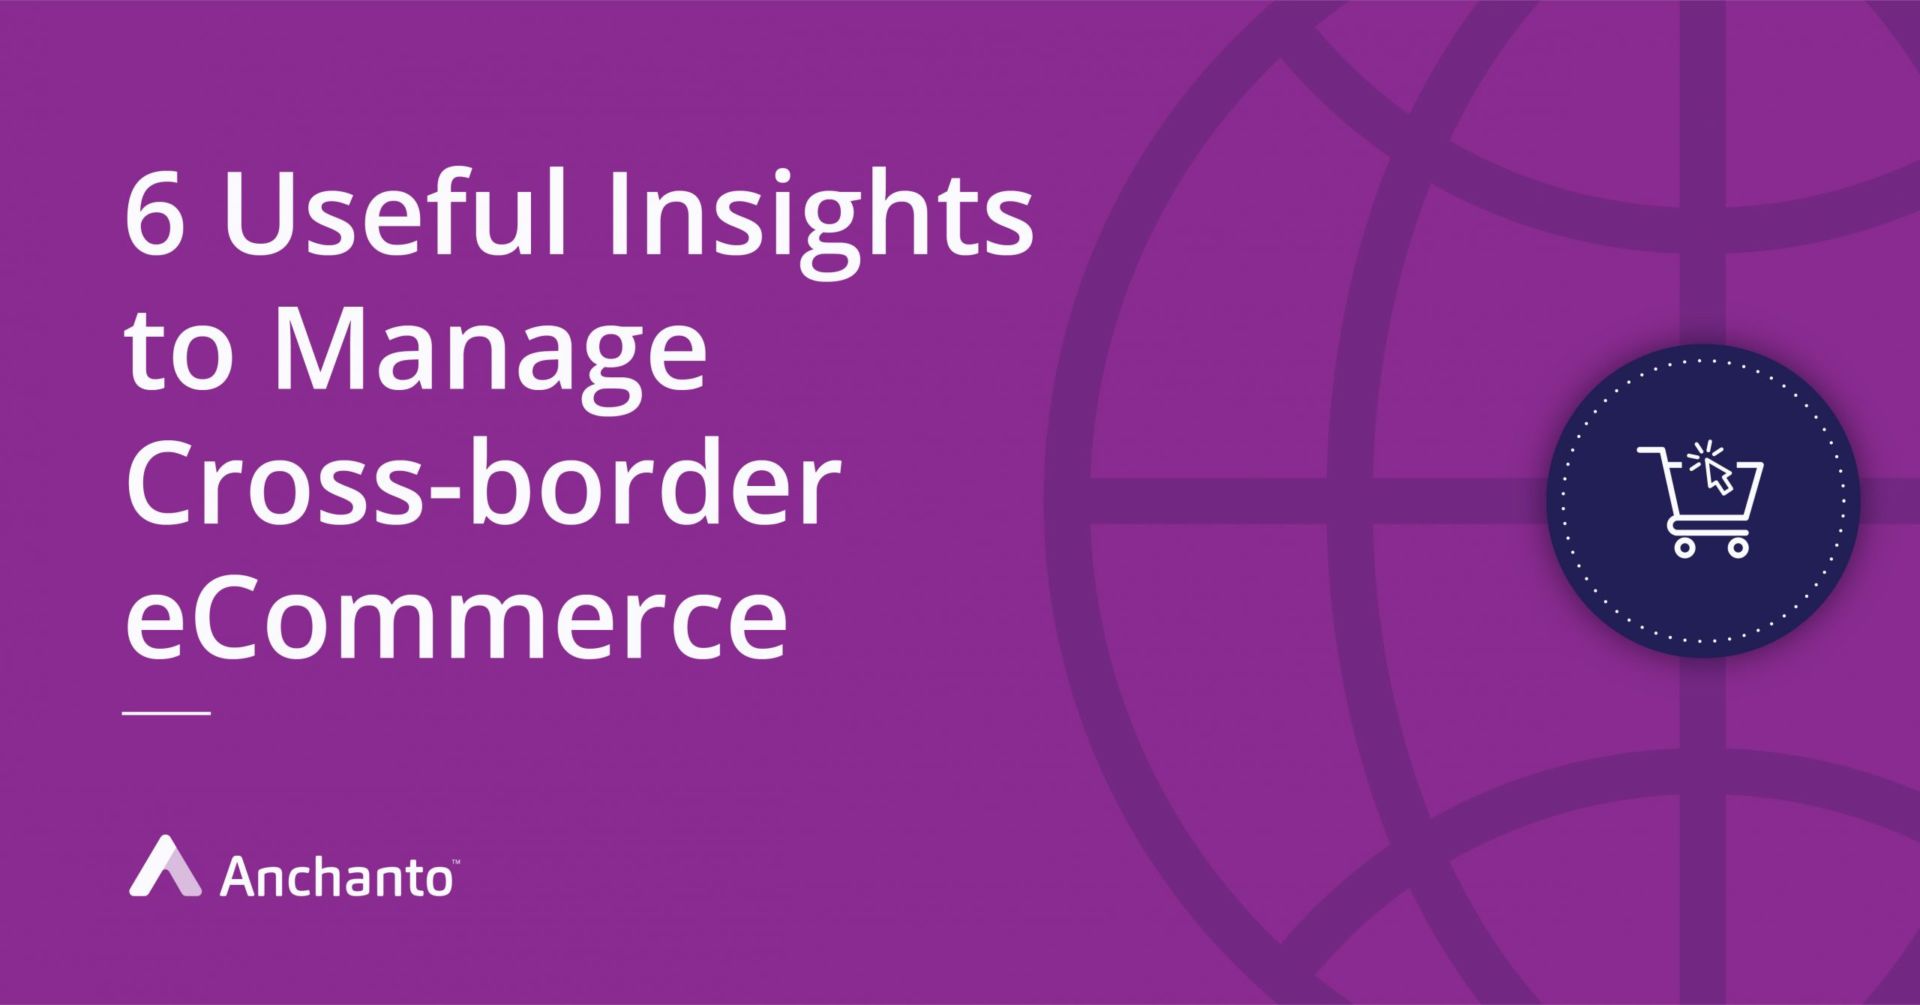 6 Useful Practical Insights to Manage Cross-border E-commerce